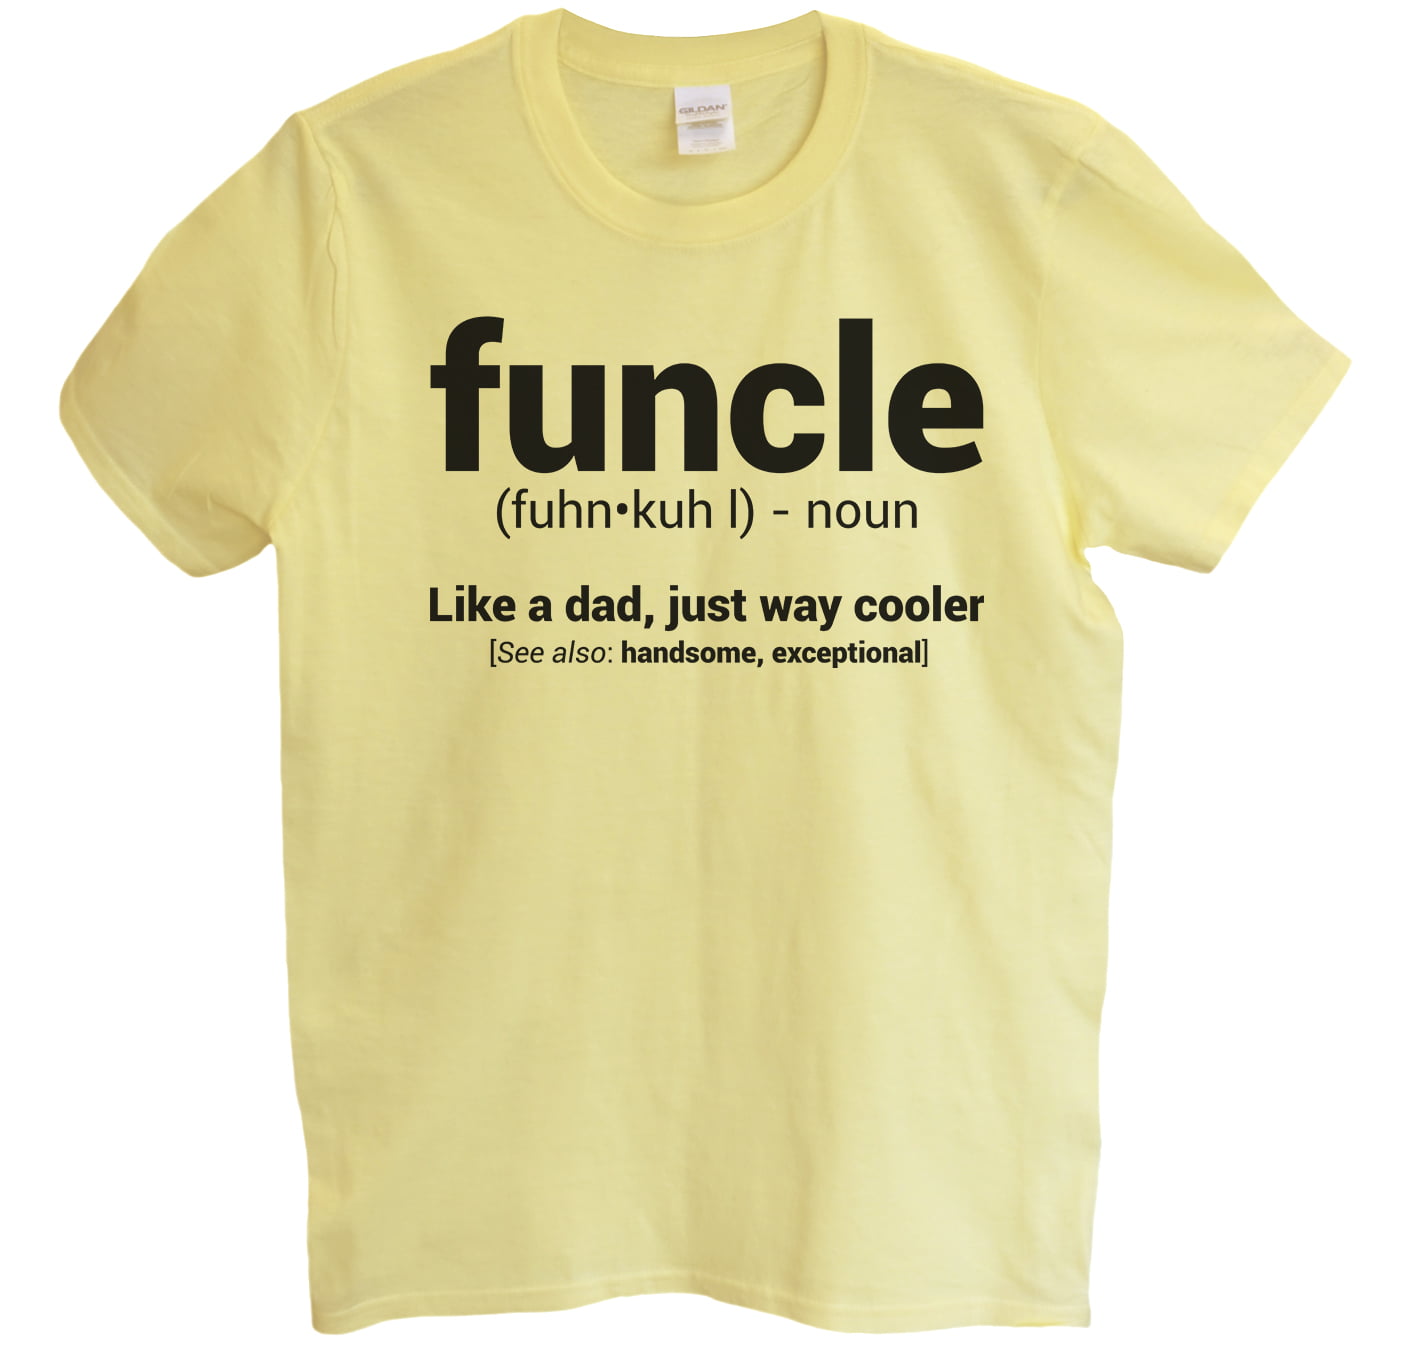 cool uncle shirt